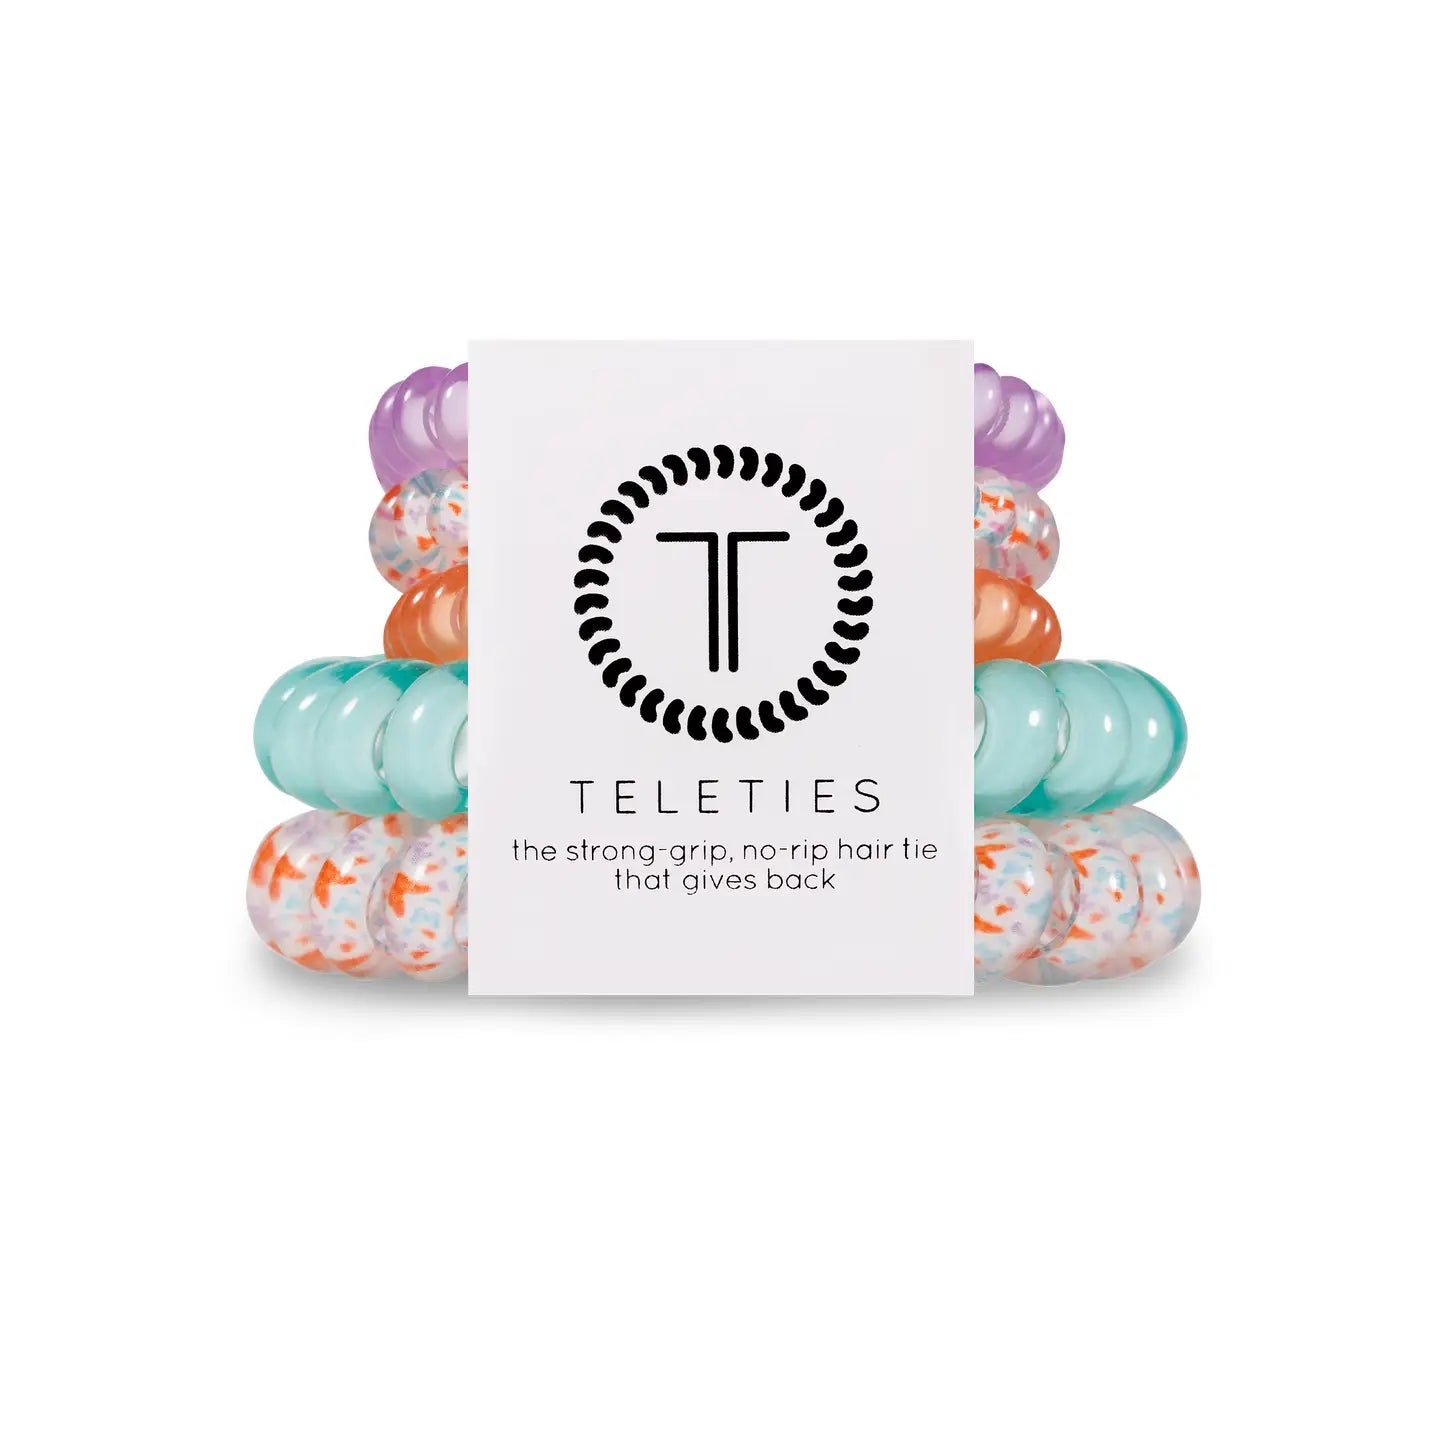 set of 5 teletie hair coils: one small purple, one small white one with butterflies, one small orange, one large turquoise, and one large white with butterflies